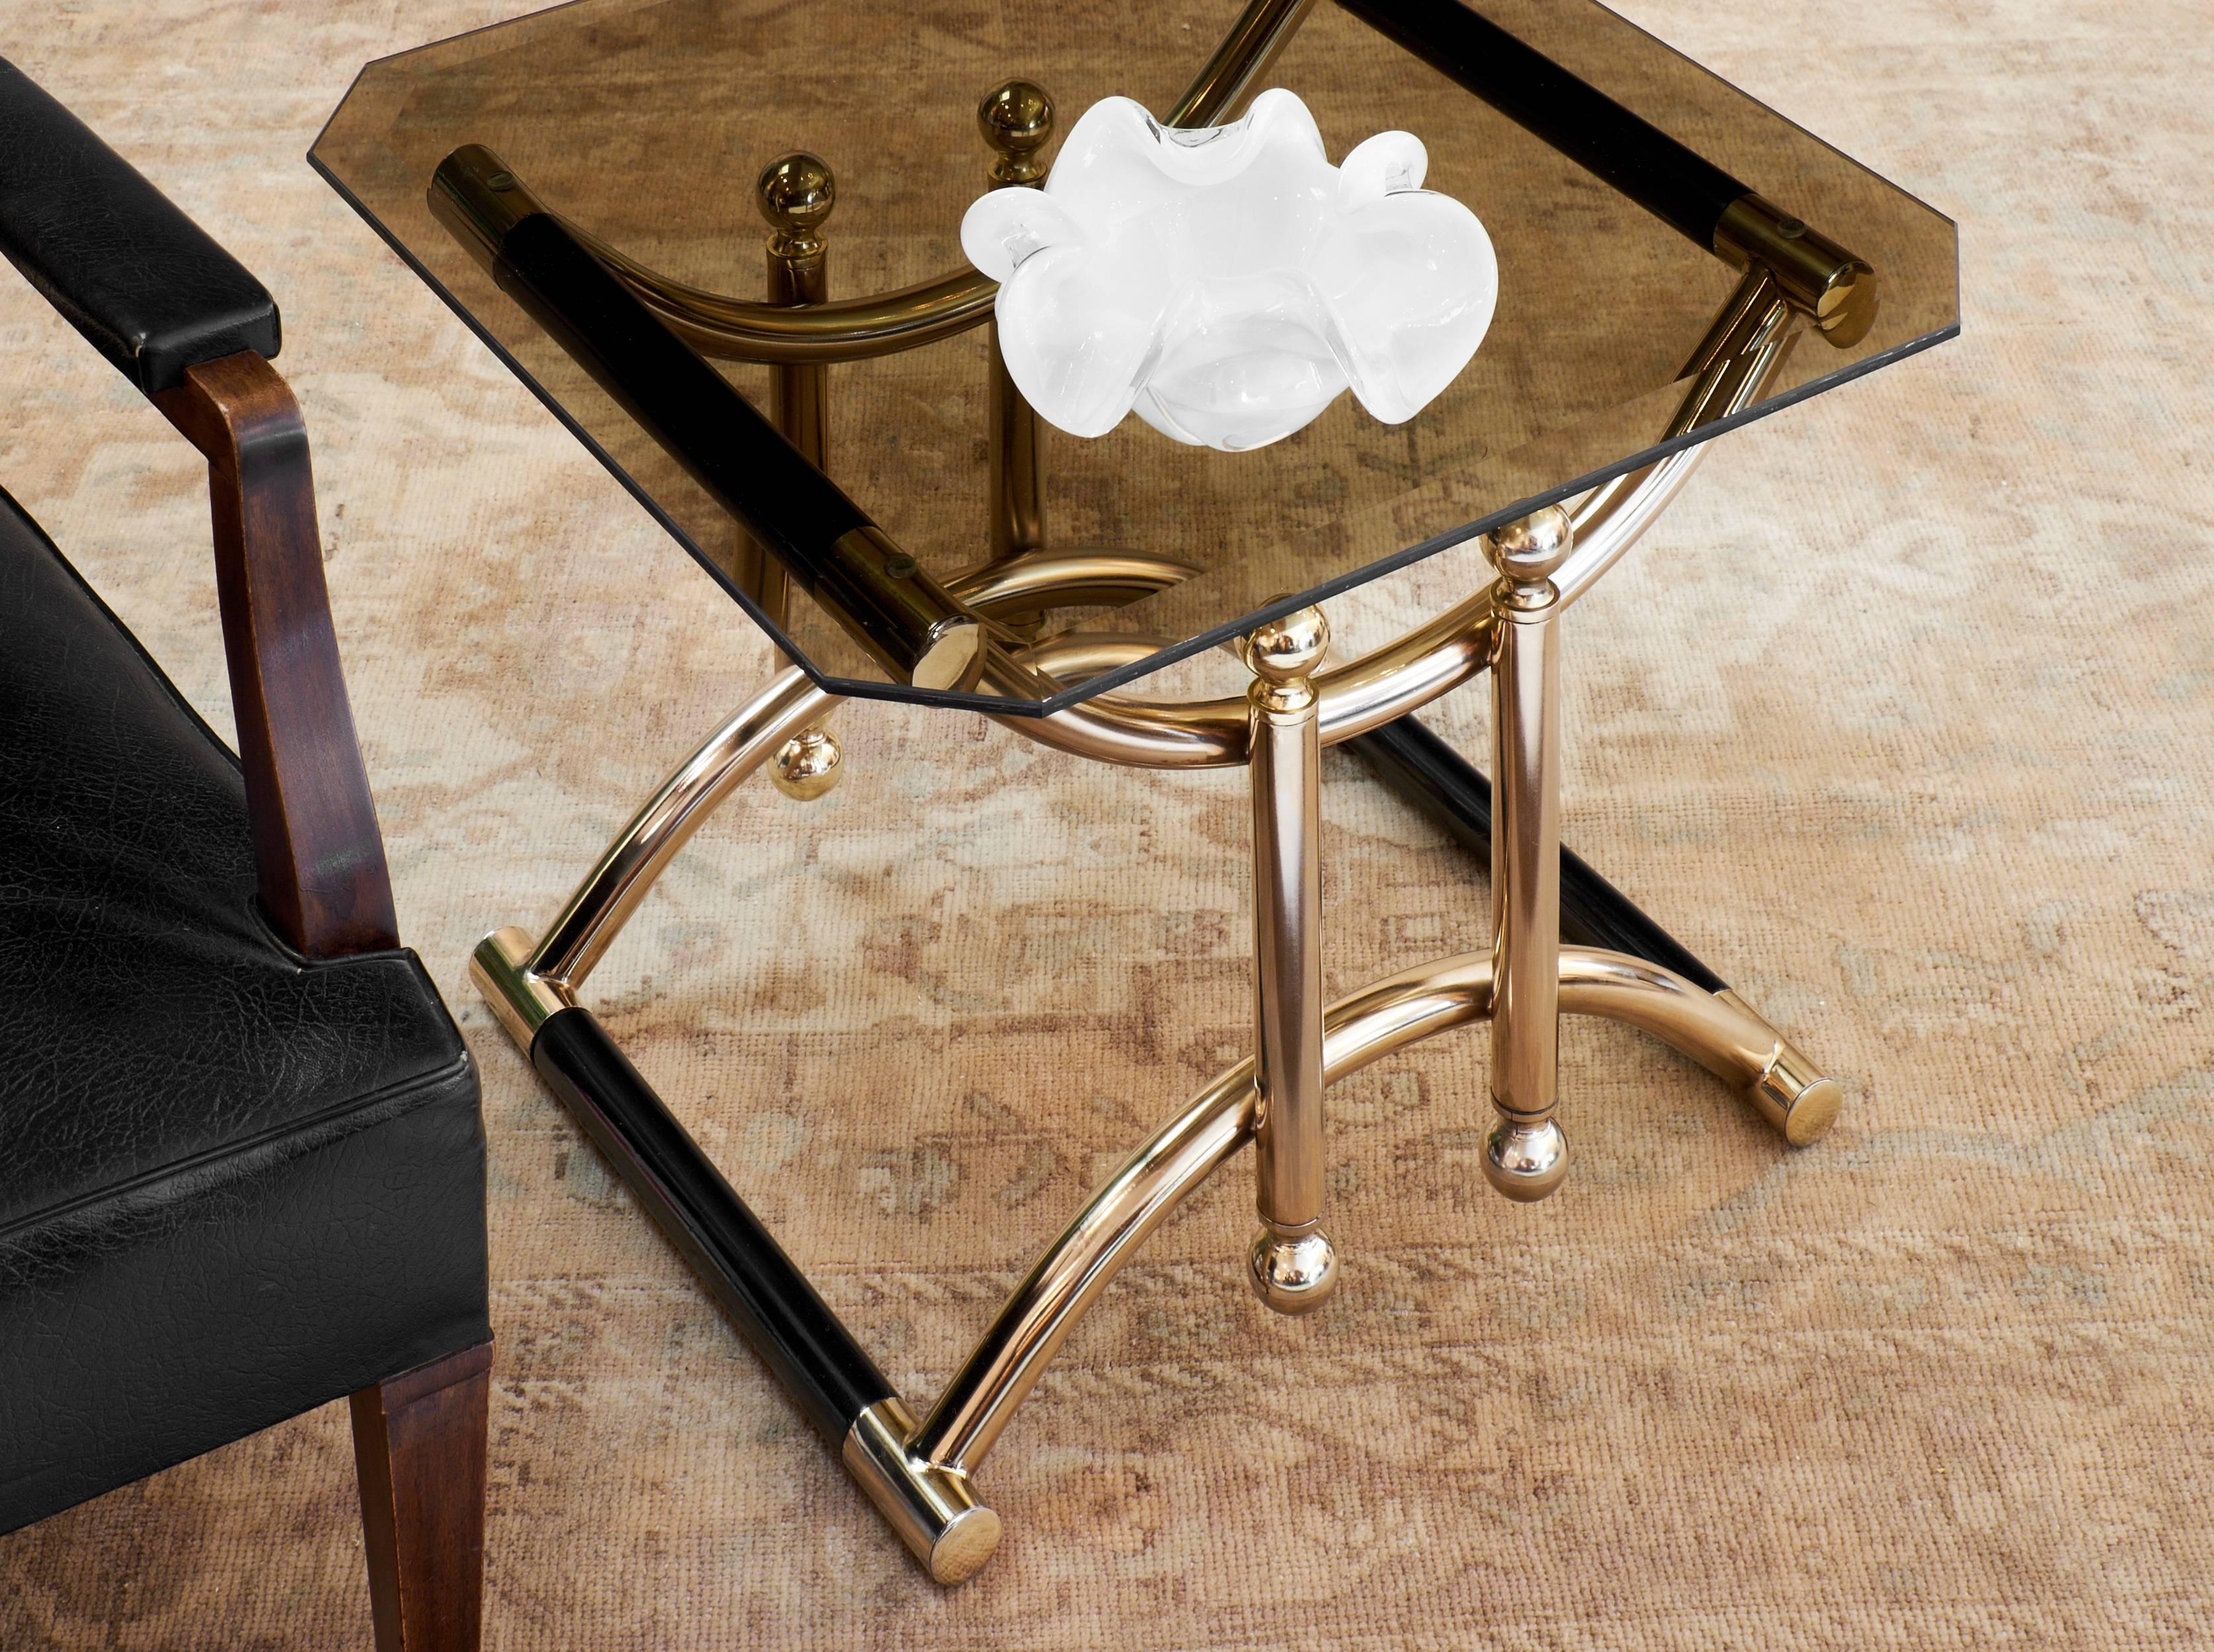 Pair of French Mid-Century smoked glass topped side tables. Gilt brass and ebonized wood frame. Lots of character, bold lines and flawless craftsmanship for this pair by the iconic Parisian fashion house.